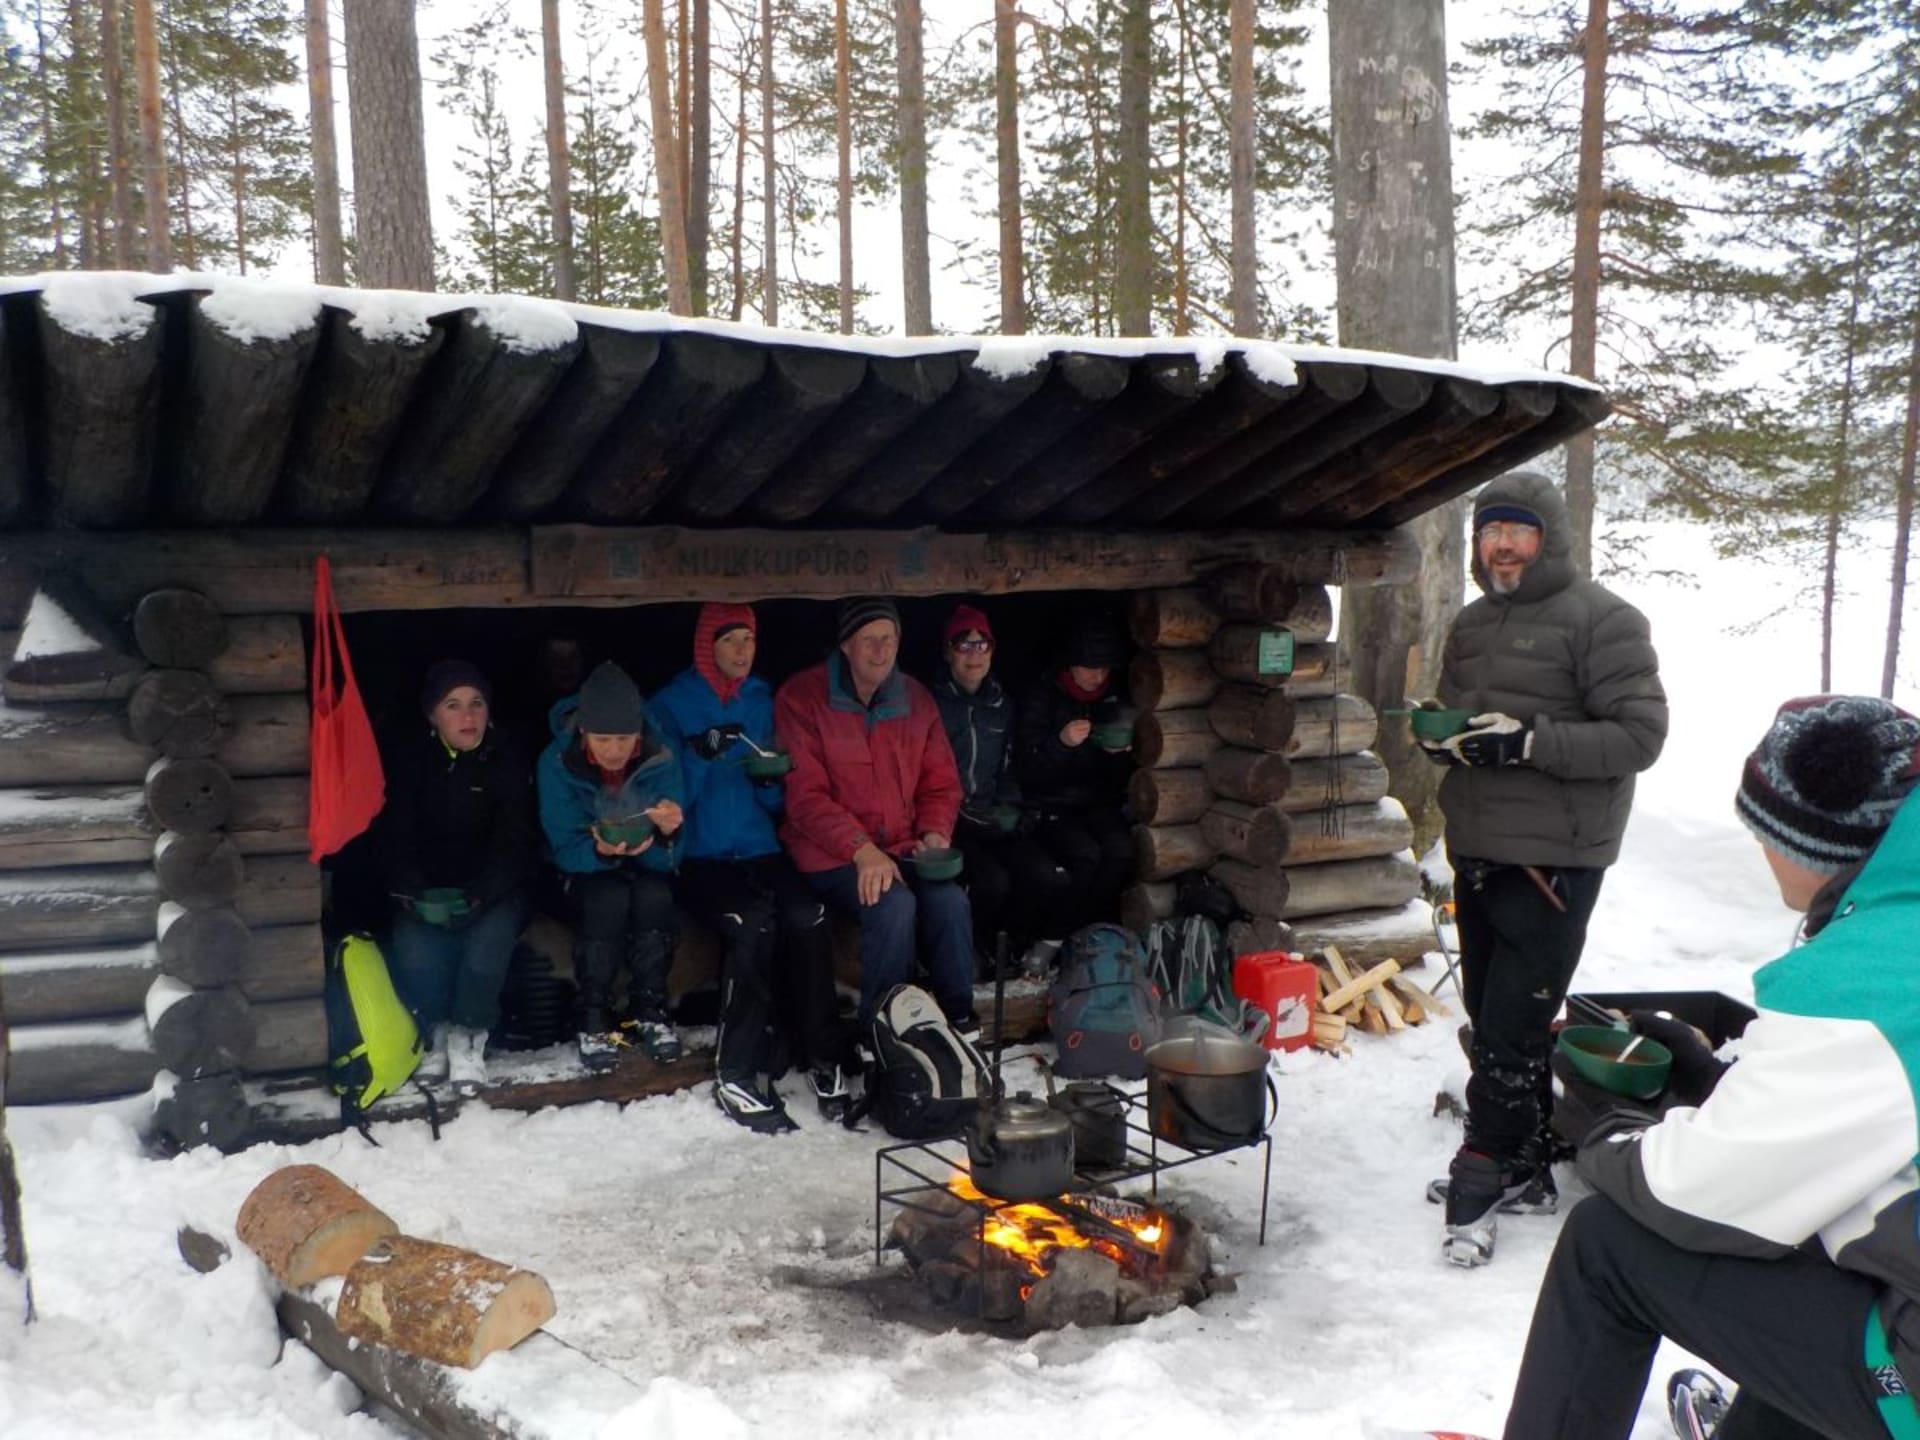 Skiers having lunch around an open fire